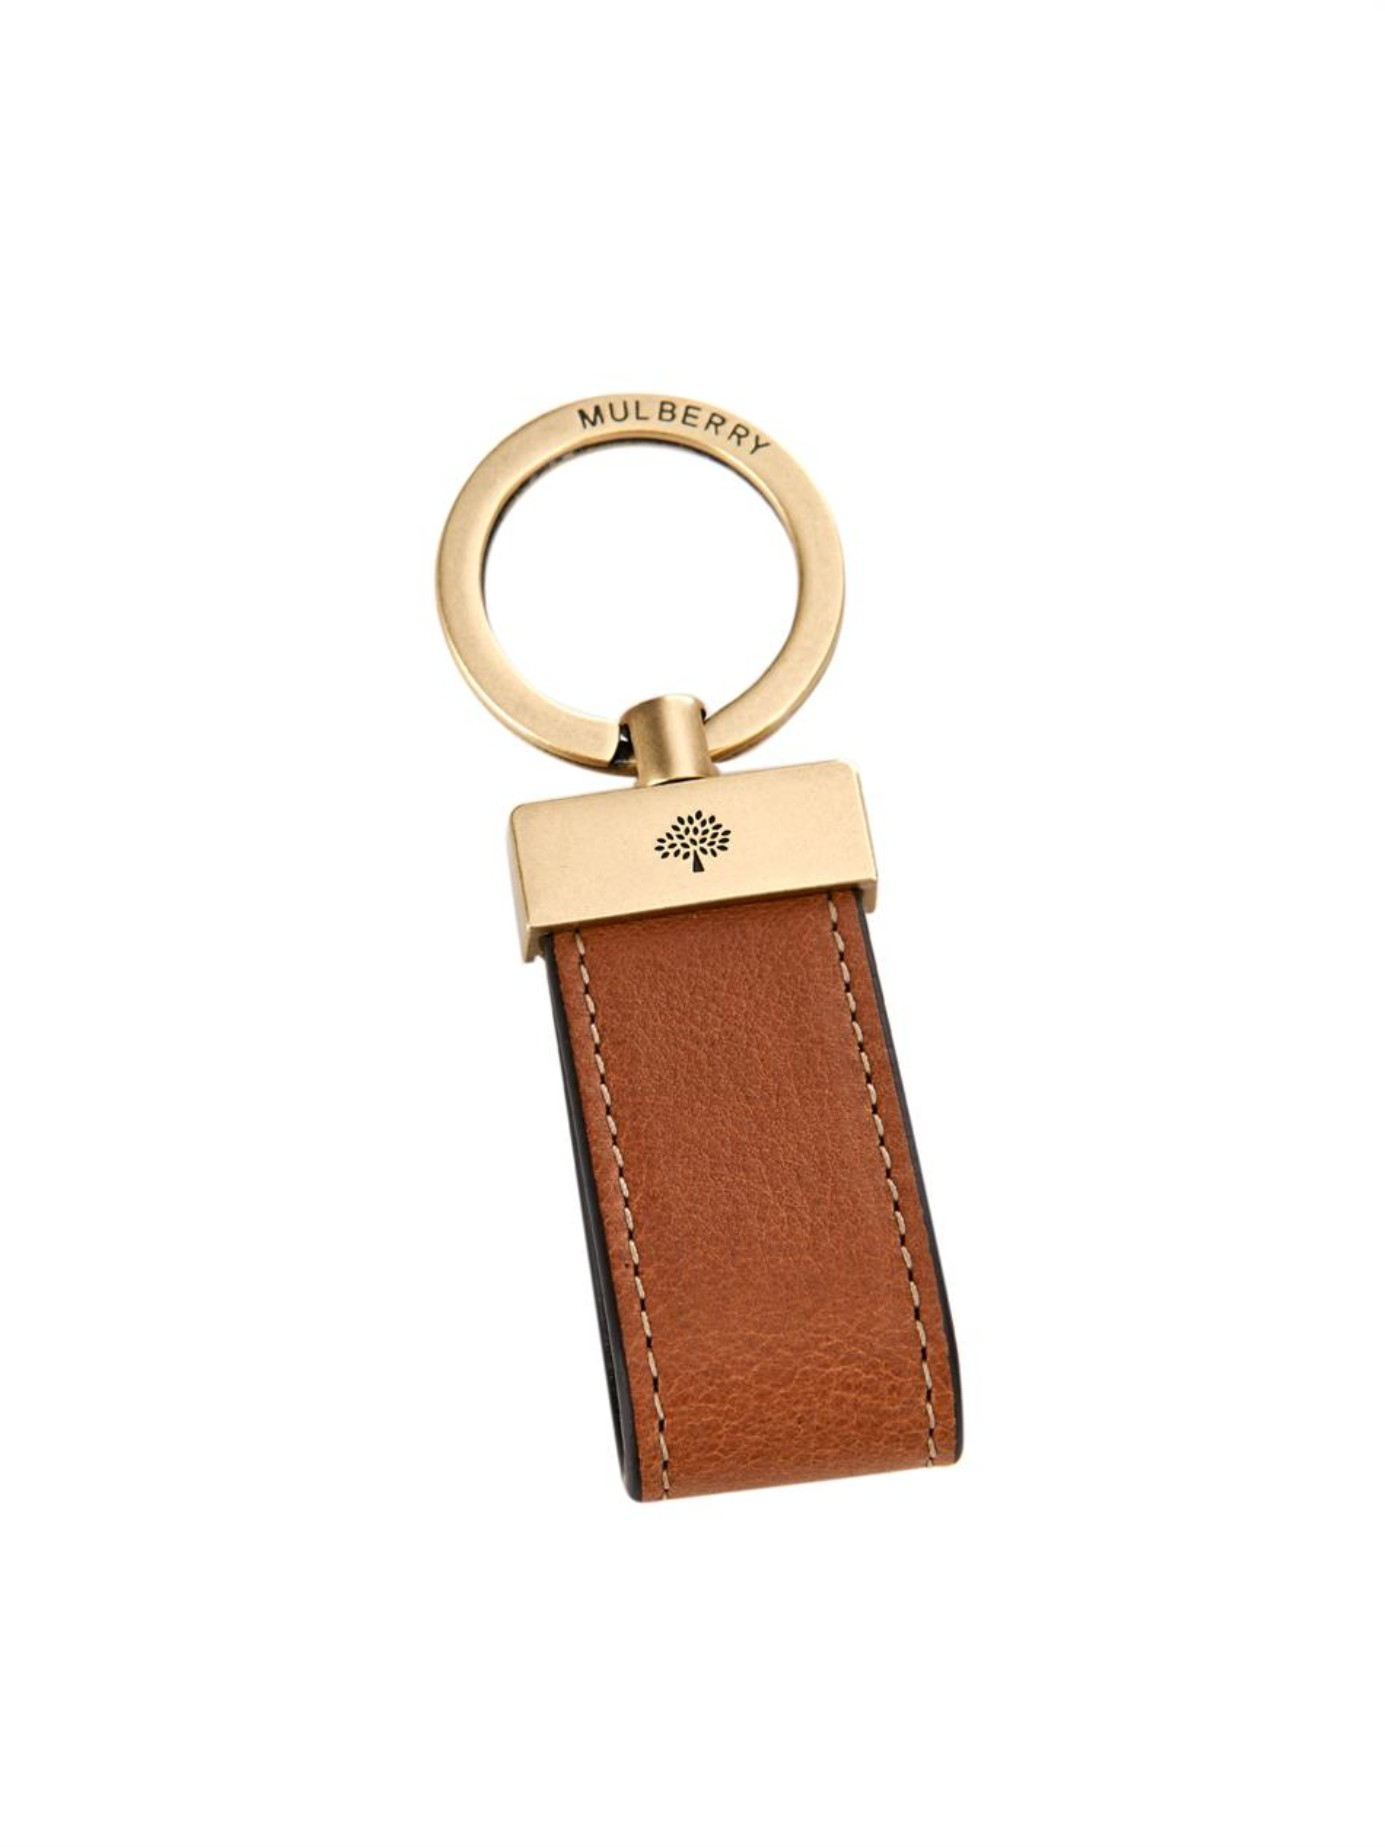 Mulberry Leather Loop Key Ring in Tan (Brown) for Men - Lyst